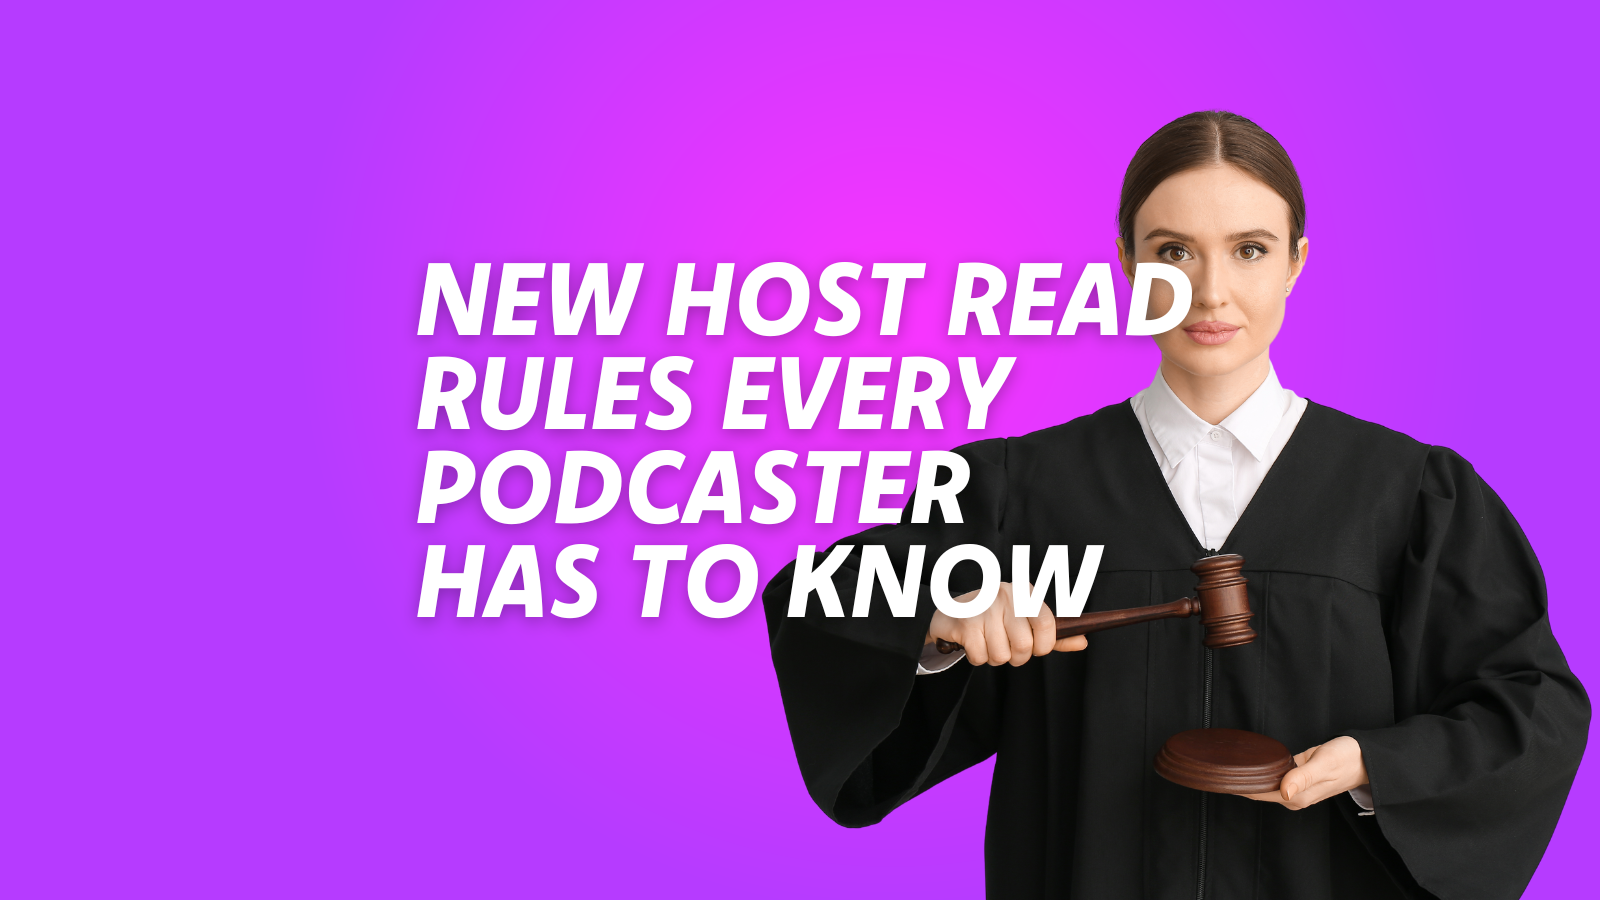 Are Your Host Reads CAP-compliant? They Should Be.